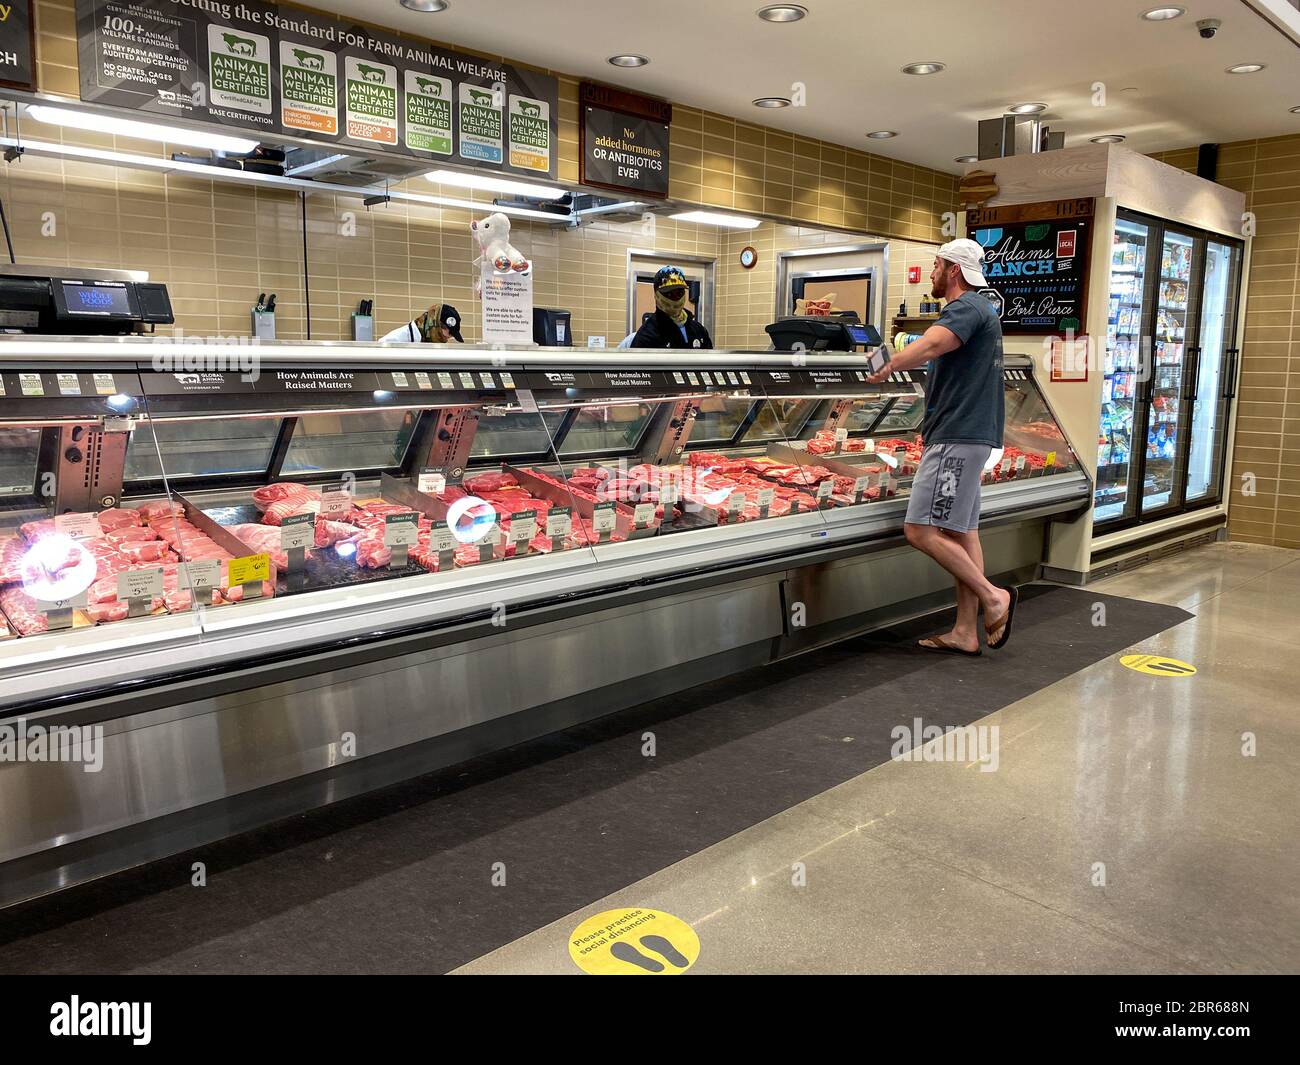 Orlando, FL/USA-5/3/20:  The meat counter at a Whole Foods Market  grocery store with a customer purchasing meat for meals. Stock Photo